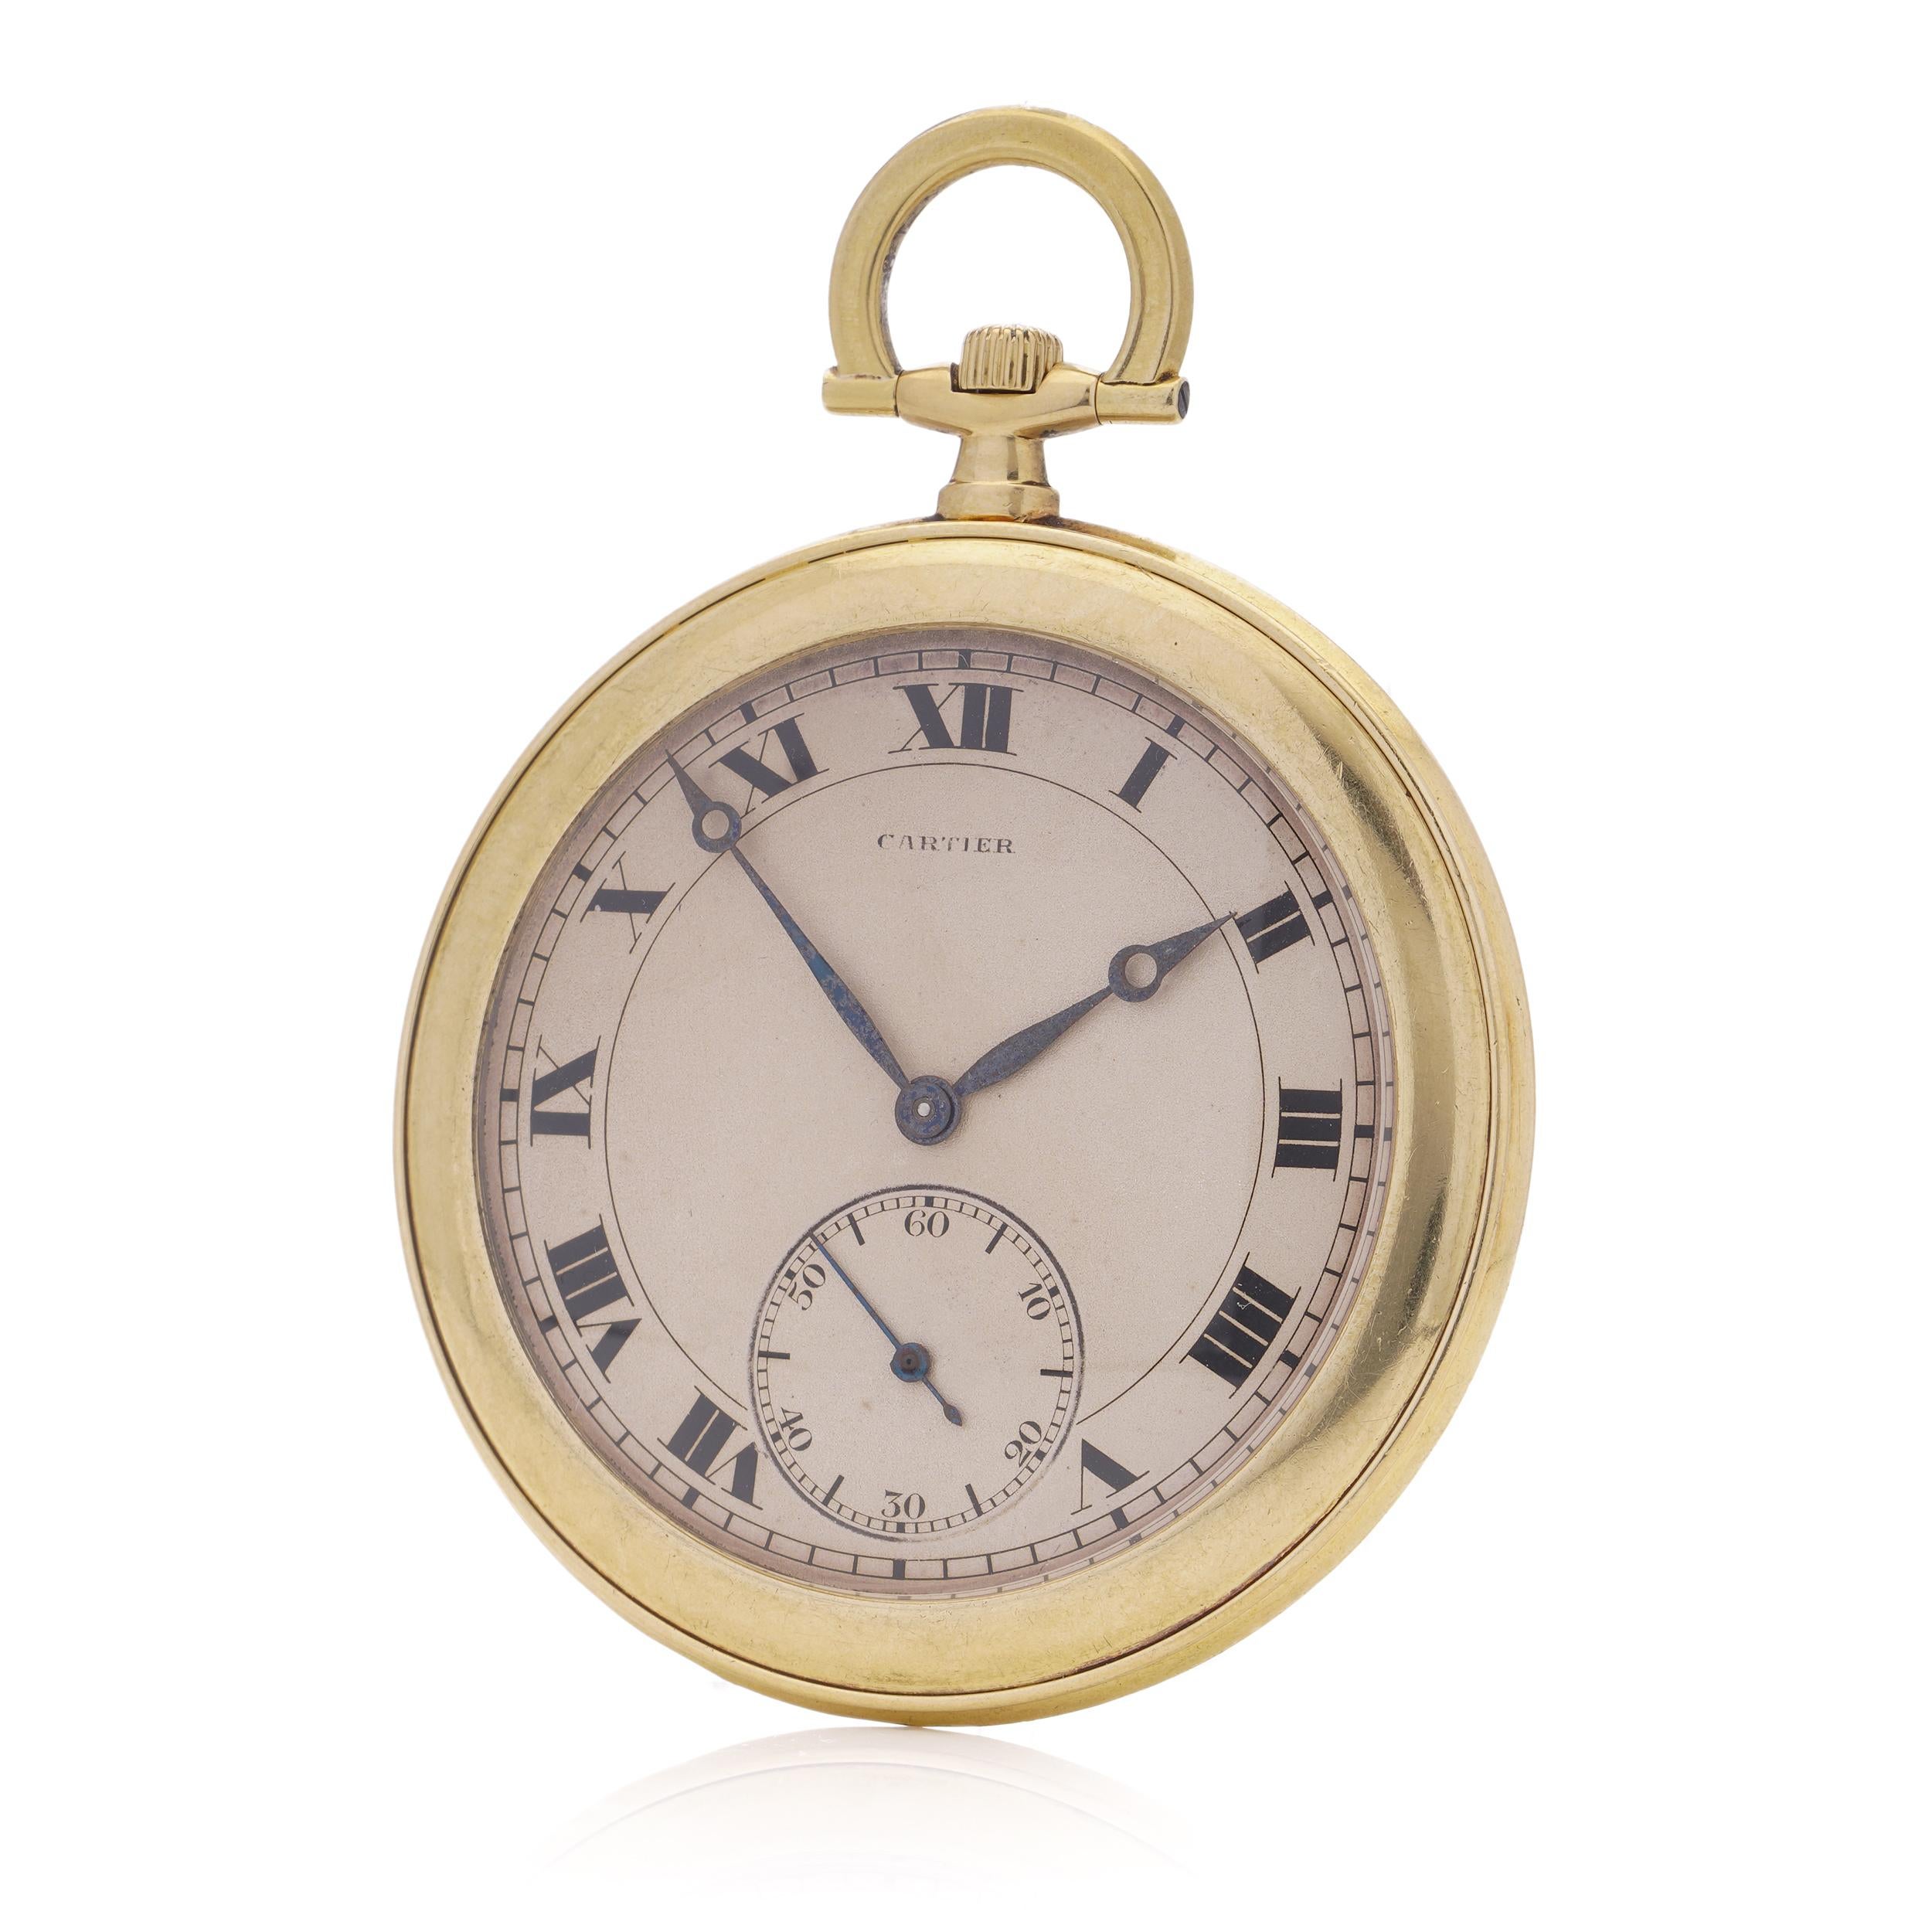 Cartier Art Deco period 18kt yellow gold open-face circular EWC movement pocket watch. 
The rear side has an engraved family crest. 

The movement is signed European Watch and Clock Company. In the early 1920s Cartier formed a joint company with